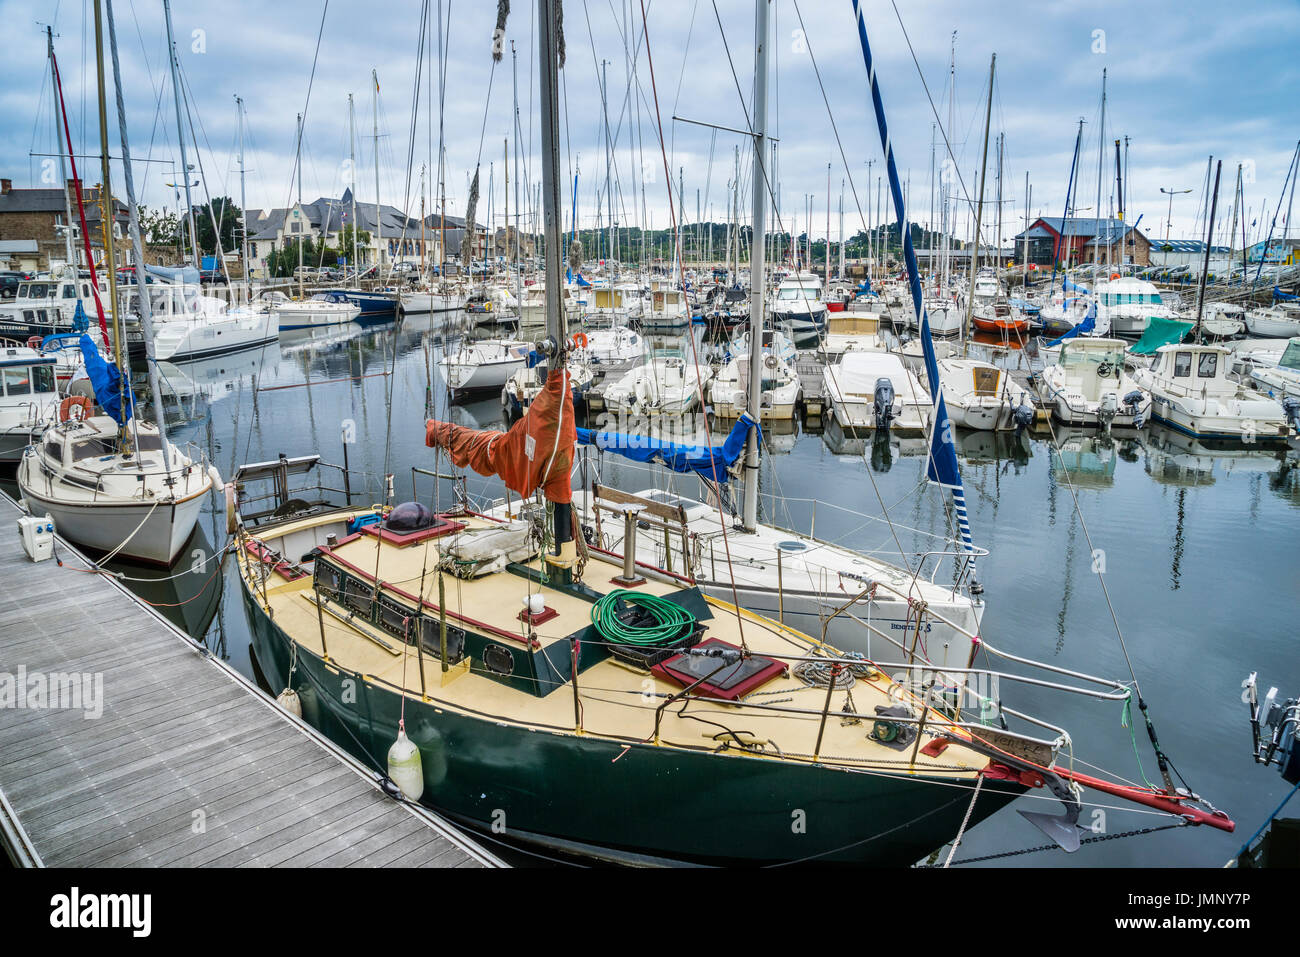 France, Brittany, Cotes-d'Armor department, Paimpol, yachts in the Port of Paimpol Stock Photo